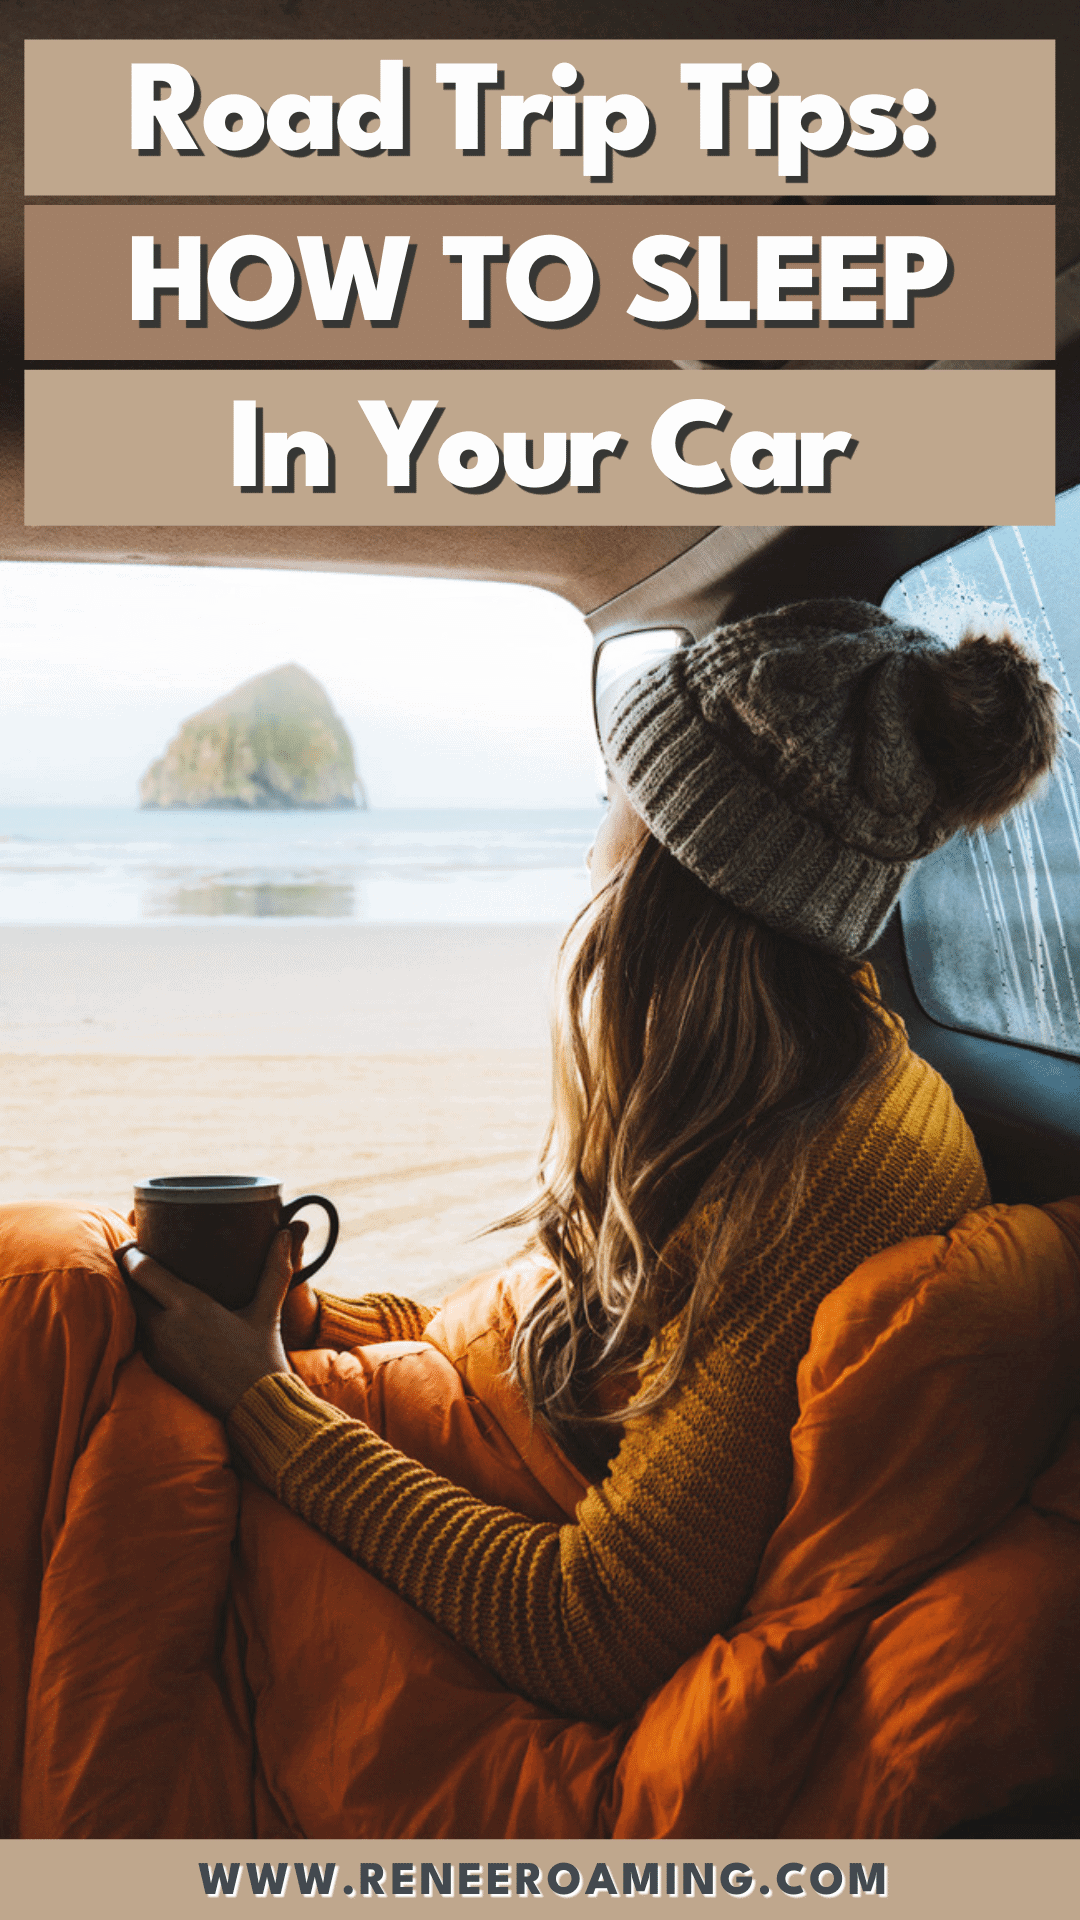 Top Tips for Sleeping In Your Car on Road Trips